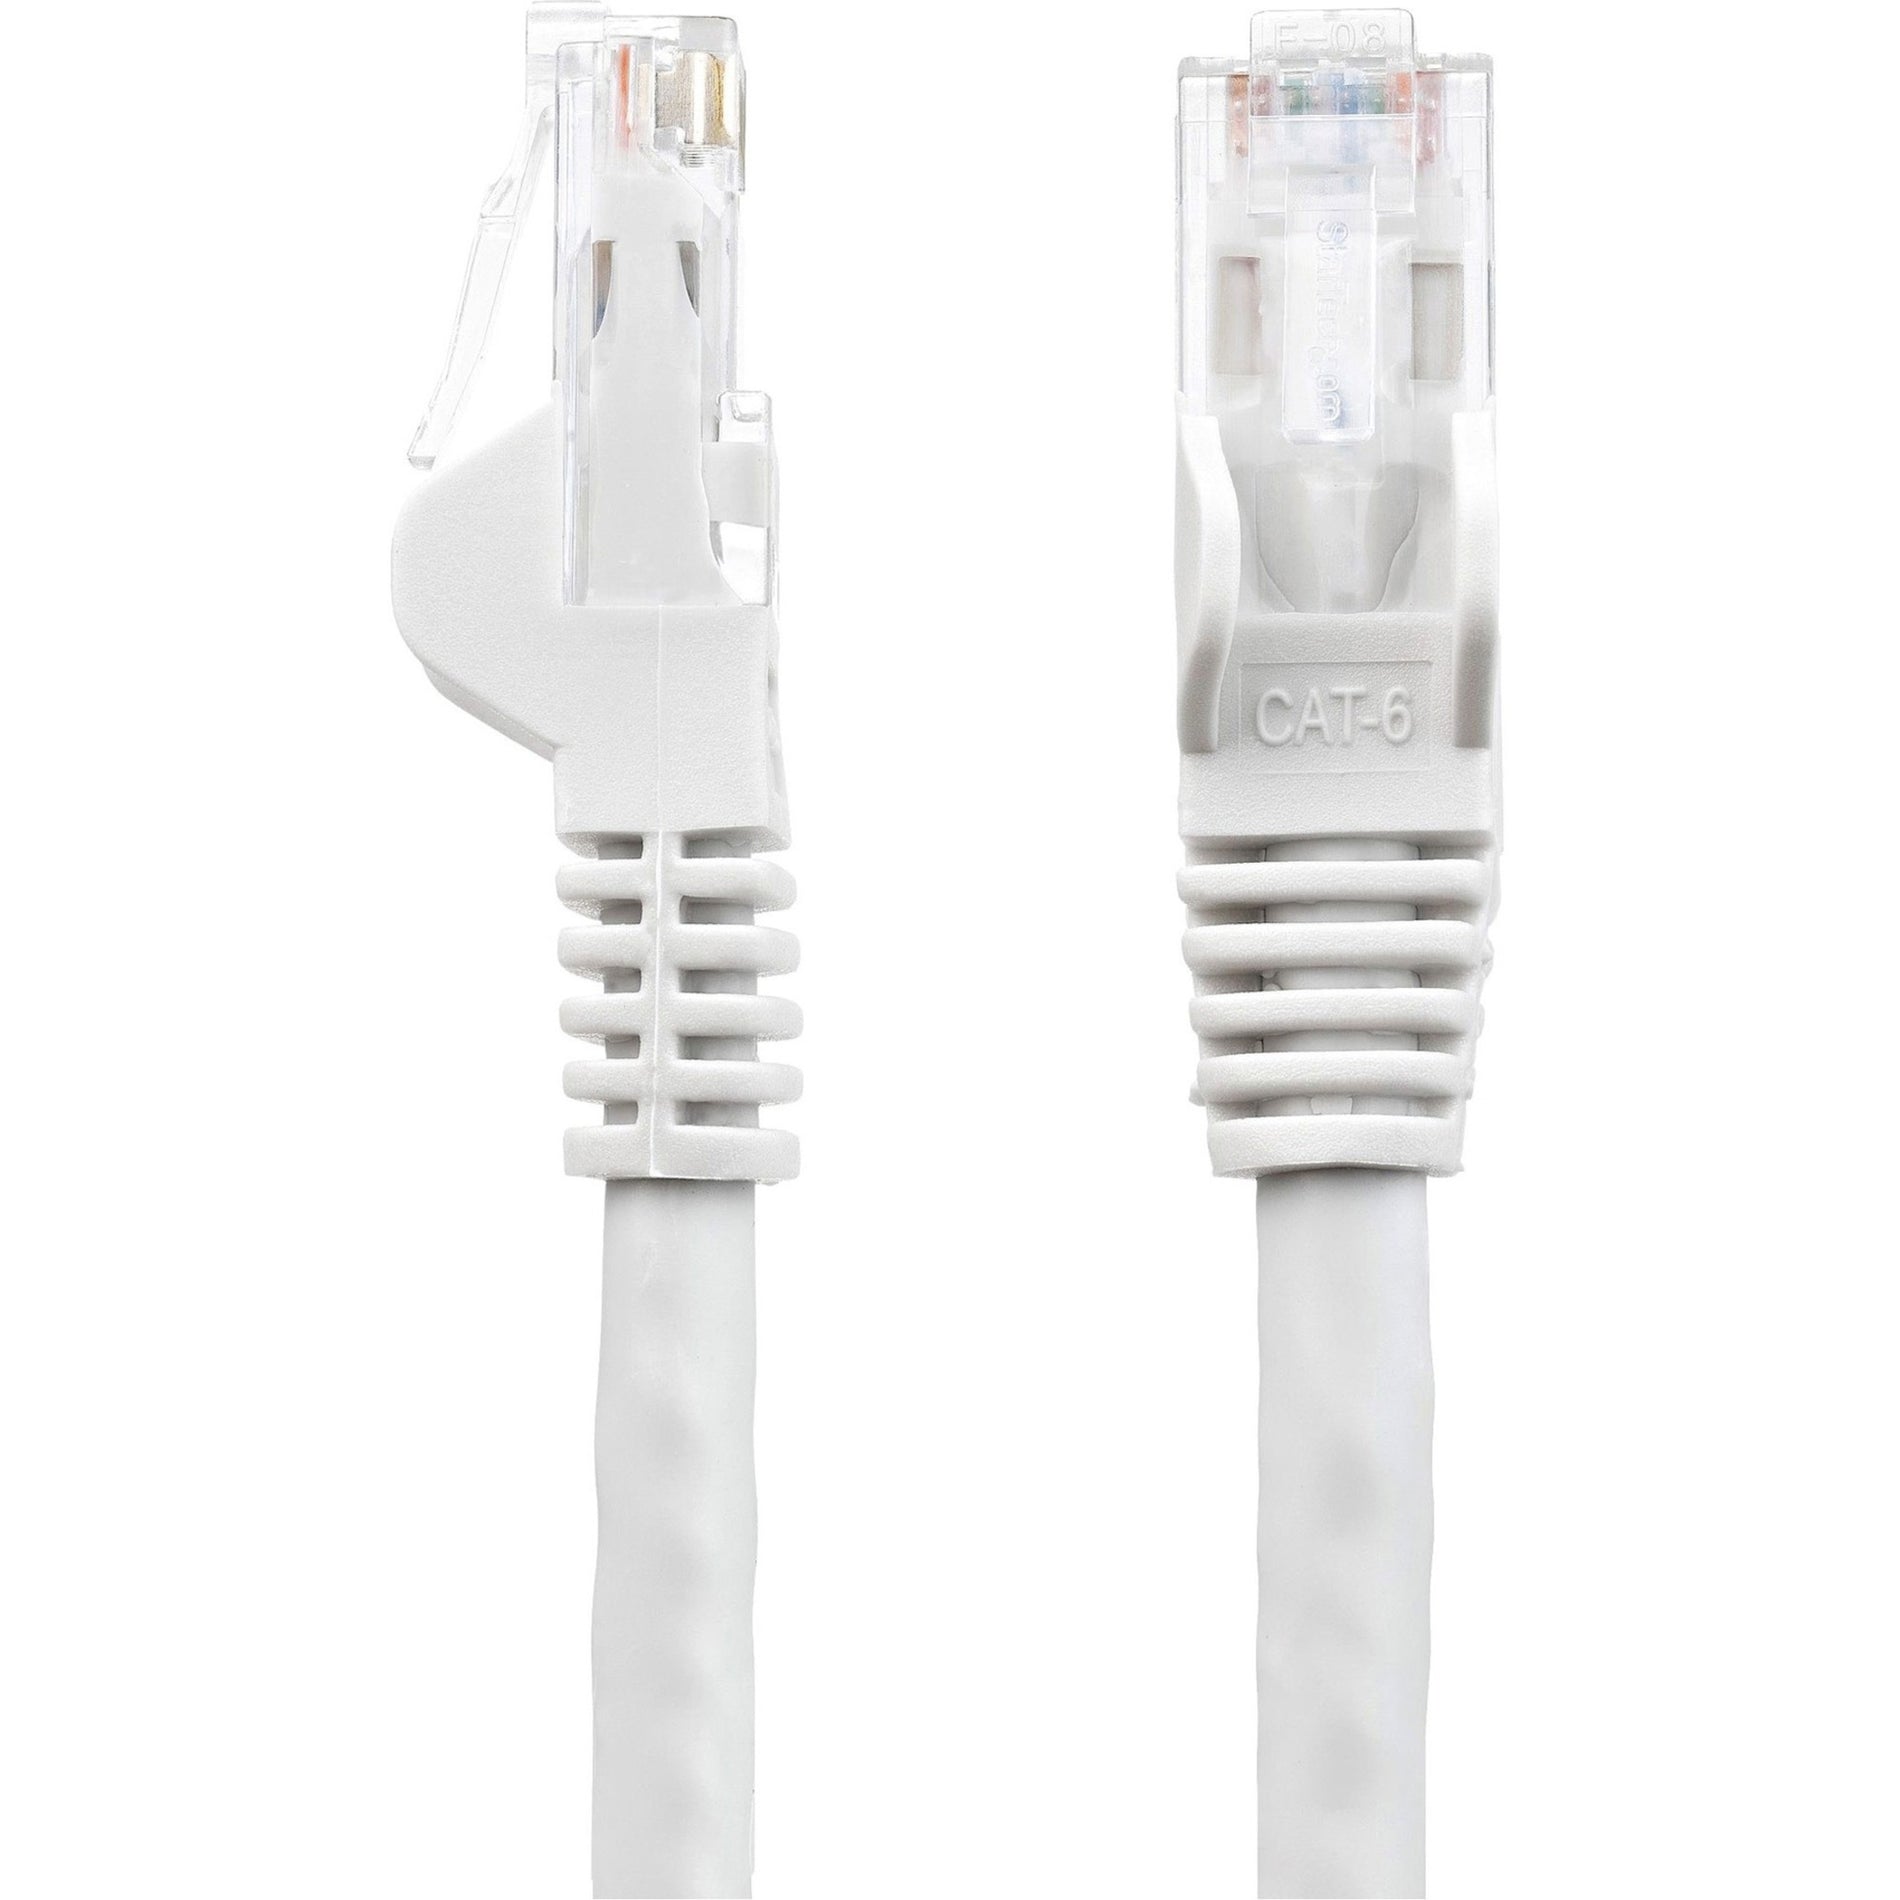 StarTech.com N6PATCH150WH Cat6 Patch Cable, 150ft White Ethernet Cable, Snagless RJ45 Connectors